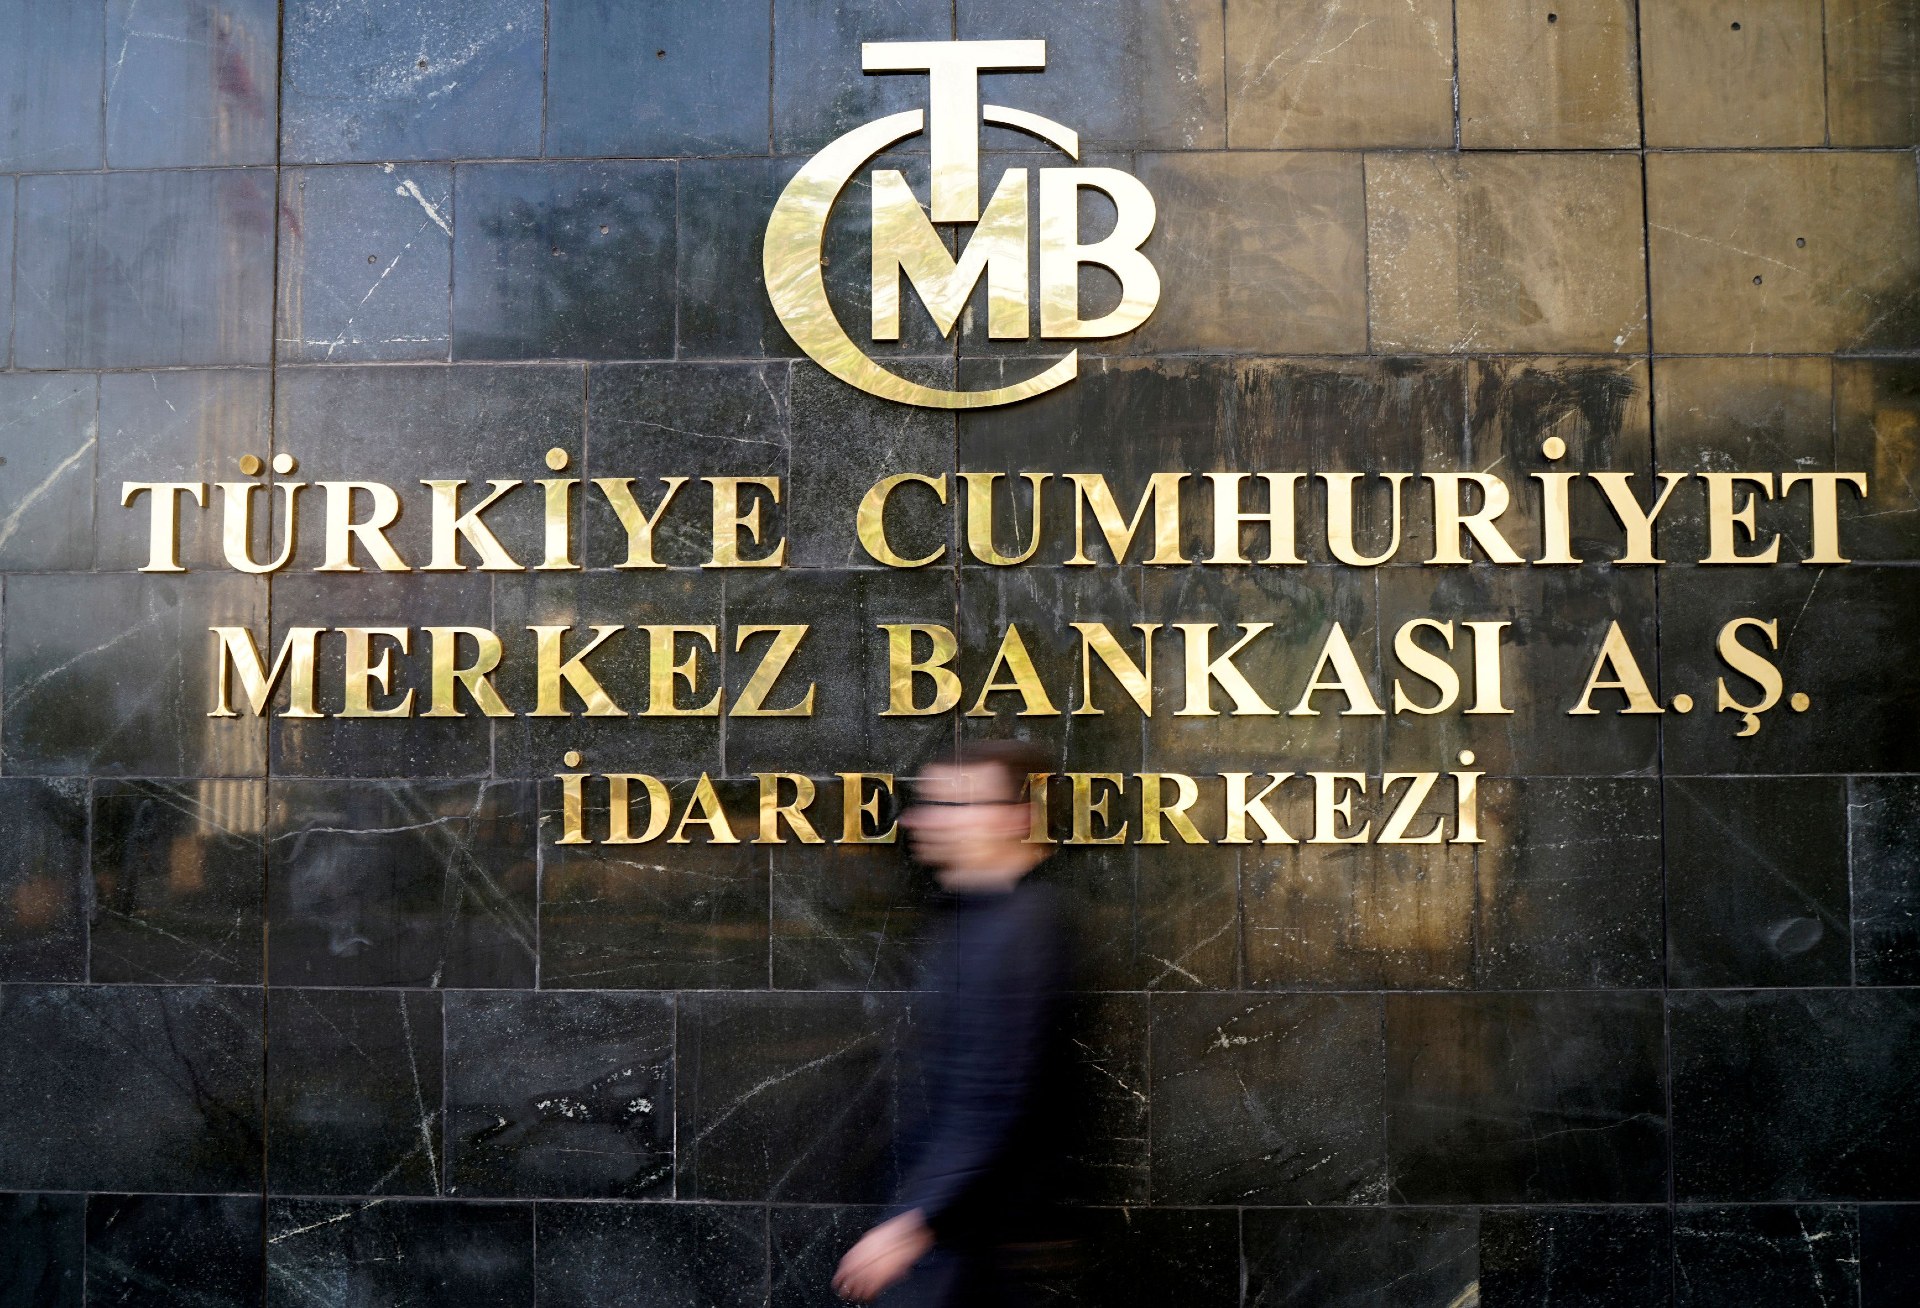 A man leaves Turkey's Central Bank headquarters in Ankara (Reuters)